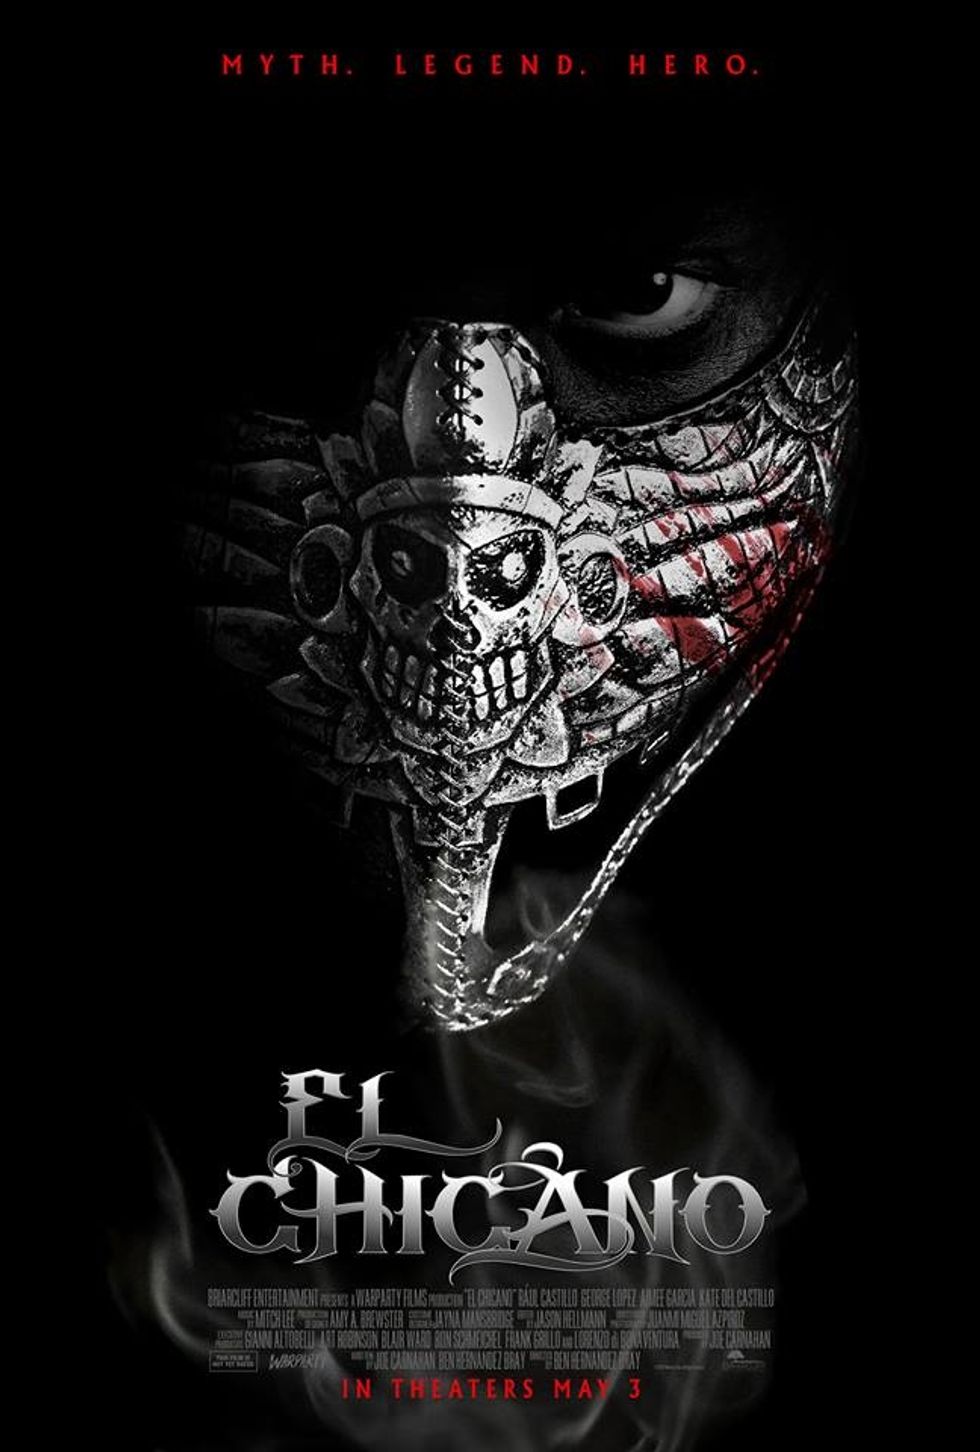 El Chicano Wins Best Feature Film at The Maryland International Film Festival- Hagerstown